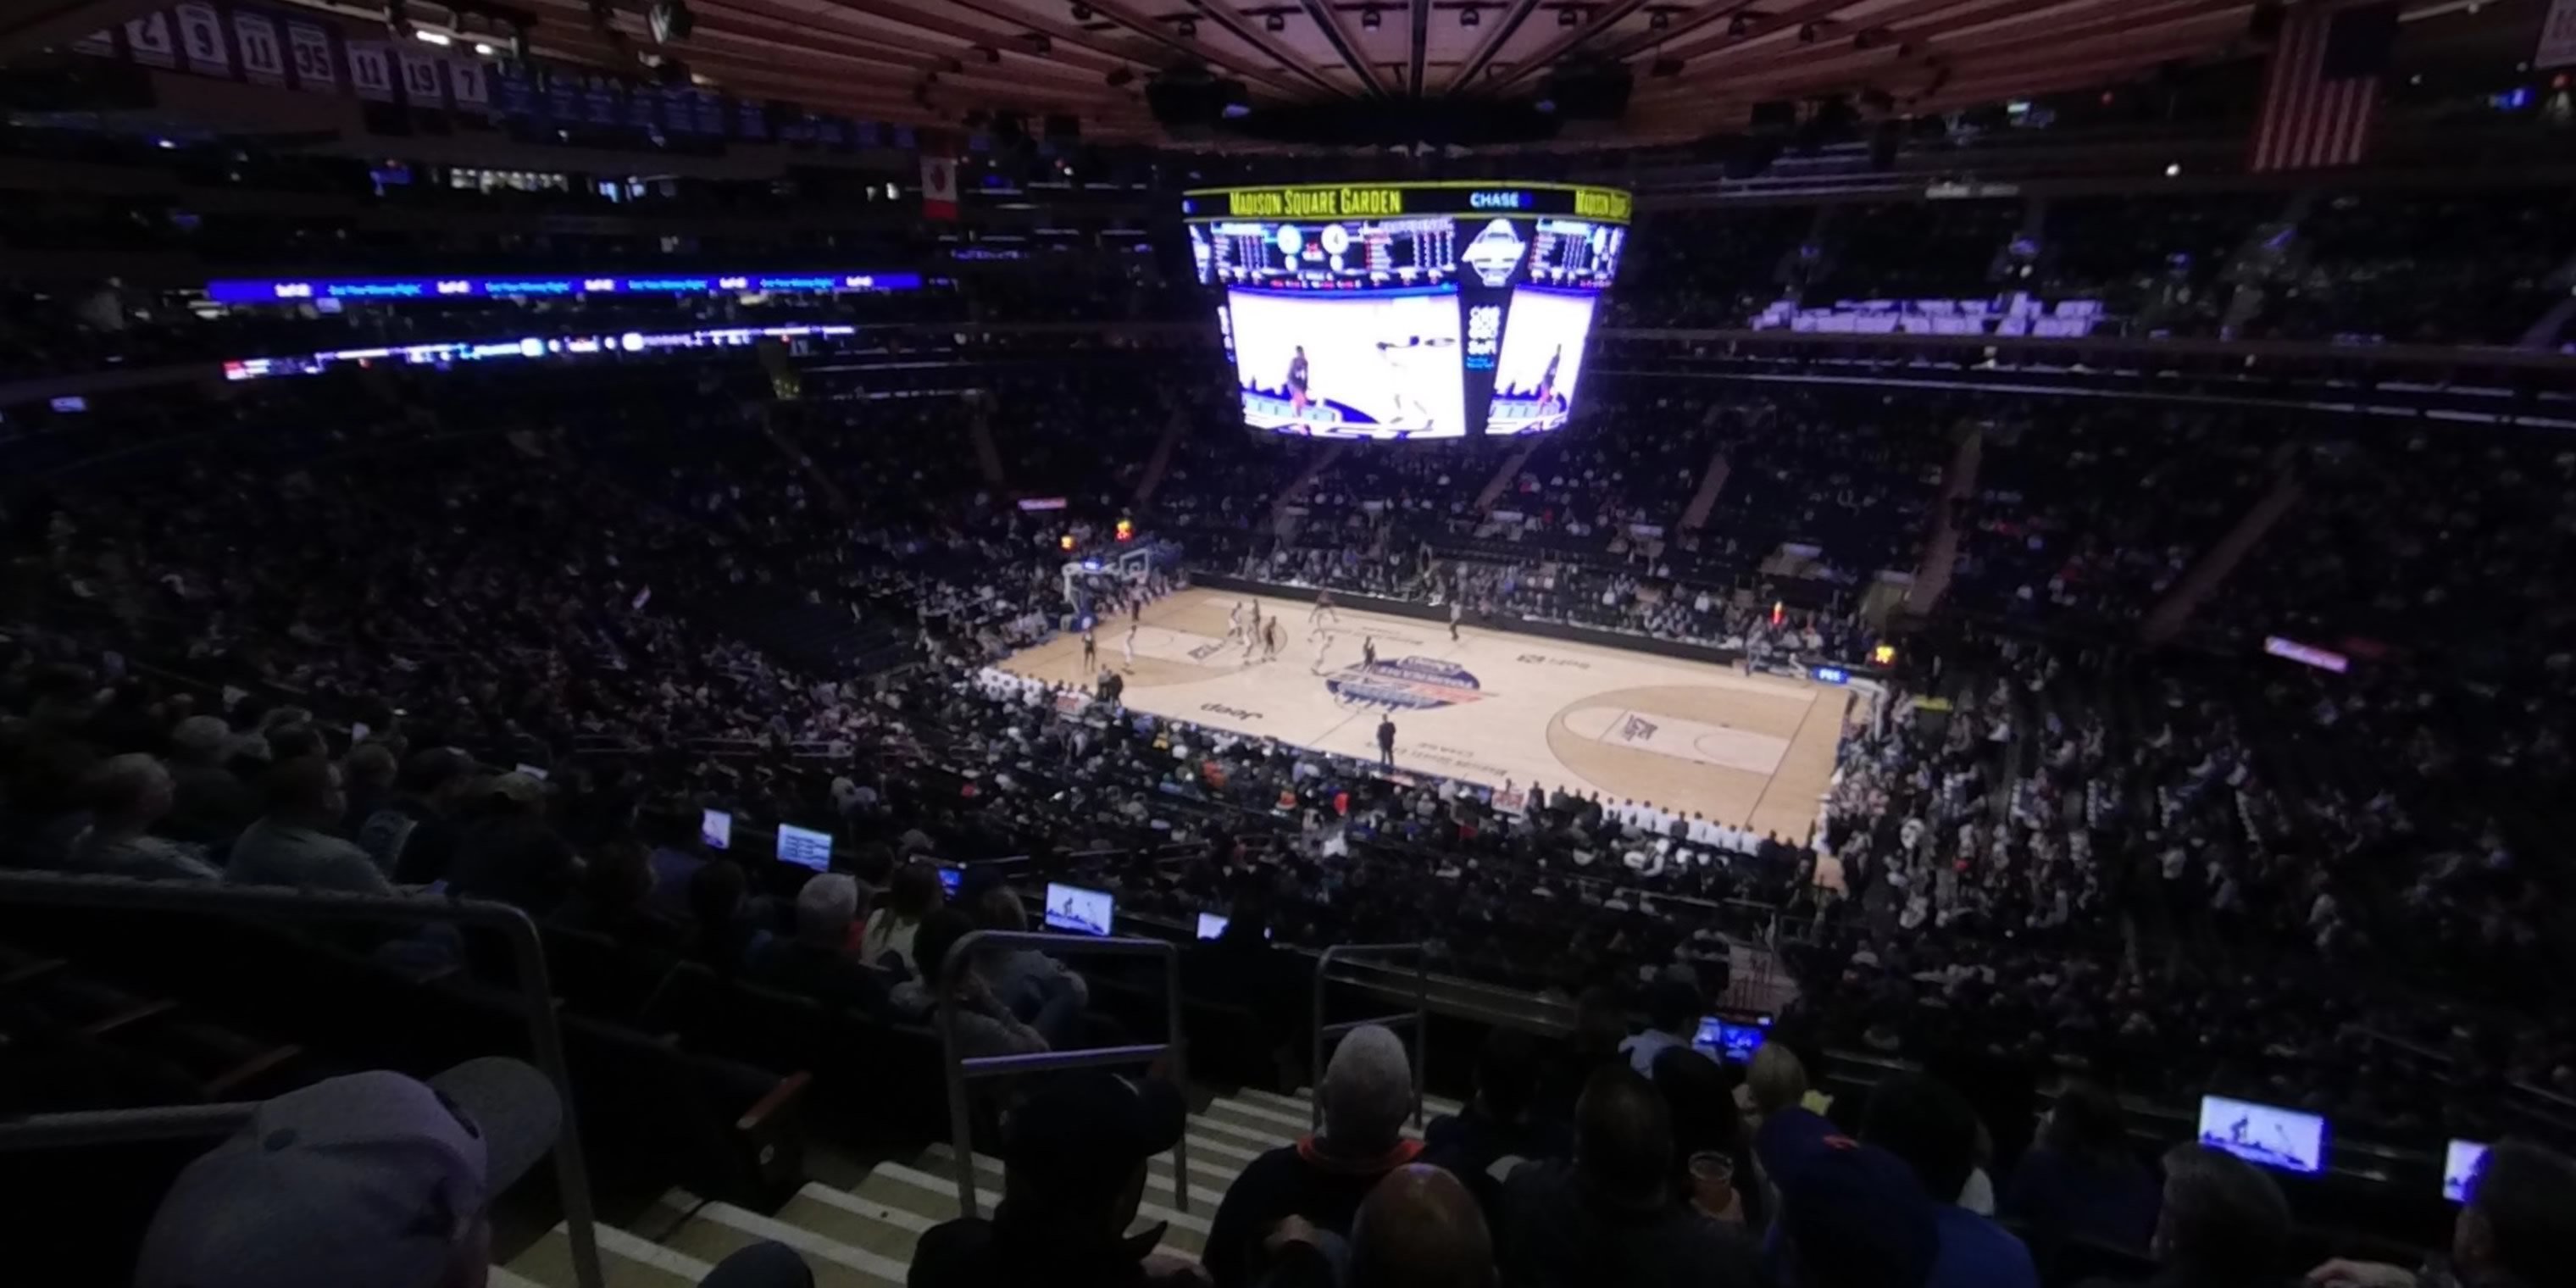 section 212 panoramic seat view  for basketball - madison square garden